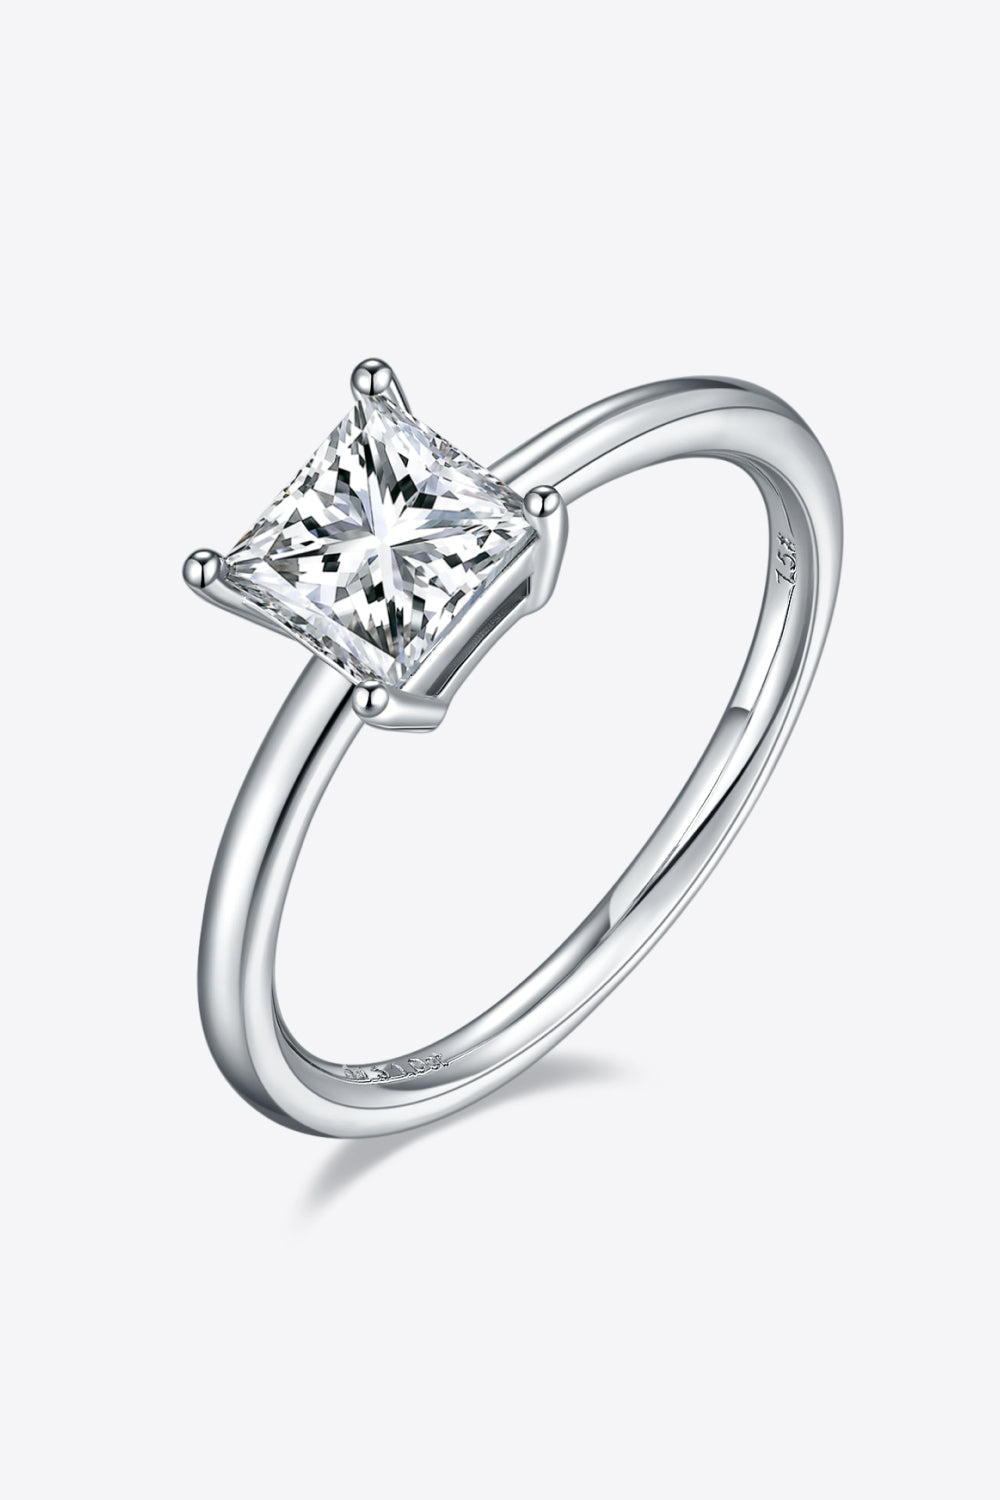 Women’s 1 Carat Moissanite 925 Sterling Silver Solitaire Ring